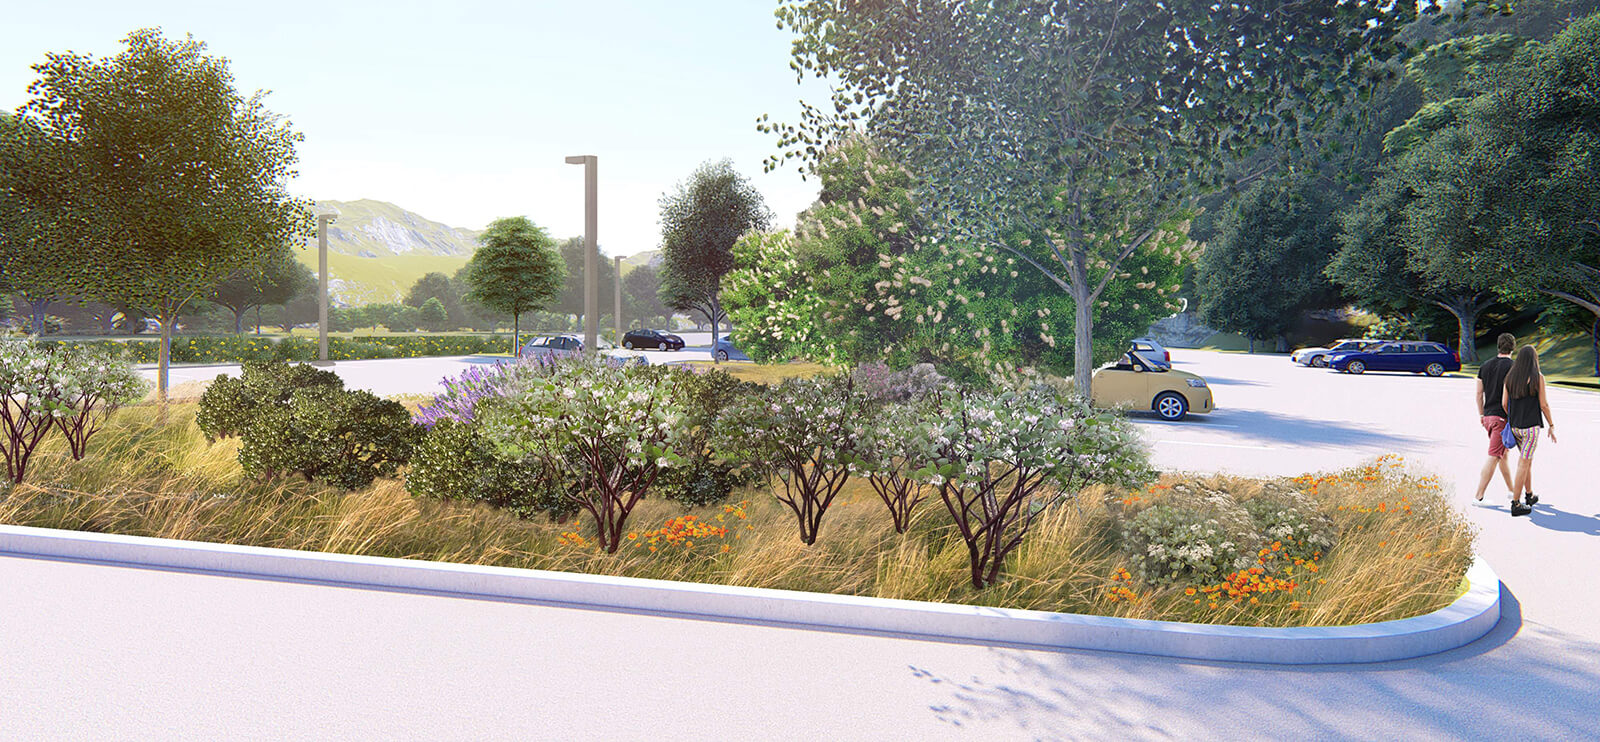 A computer rendering shows Oak Parking at ground level, landscaped with several trees, grasses, and other plants in bloom.